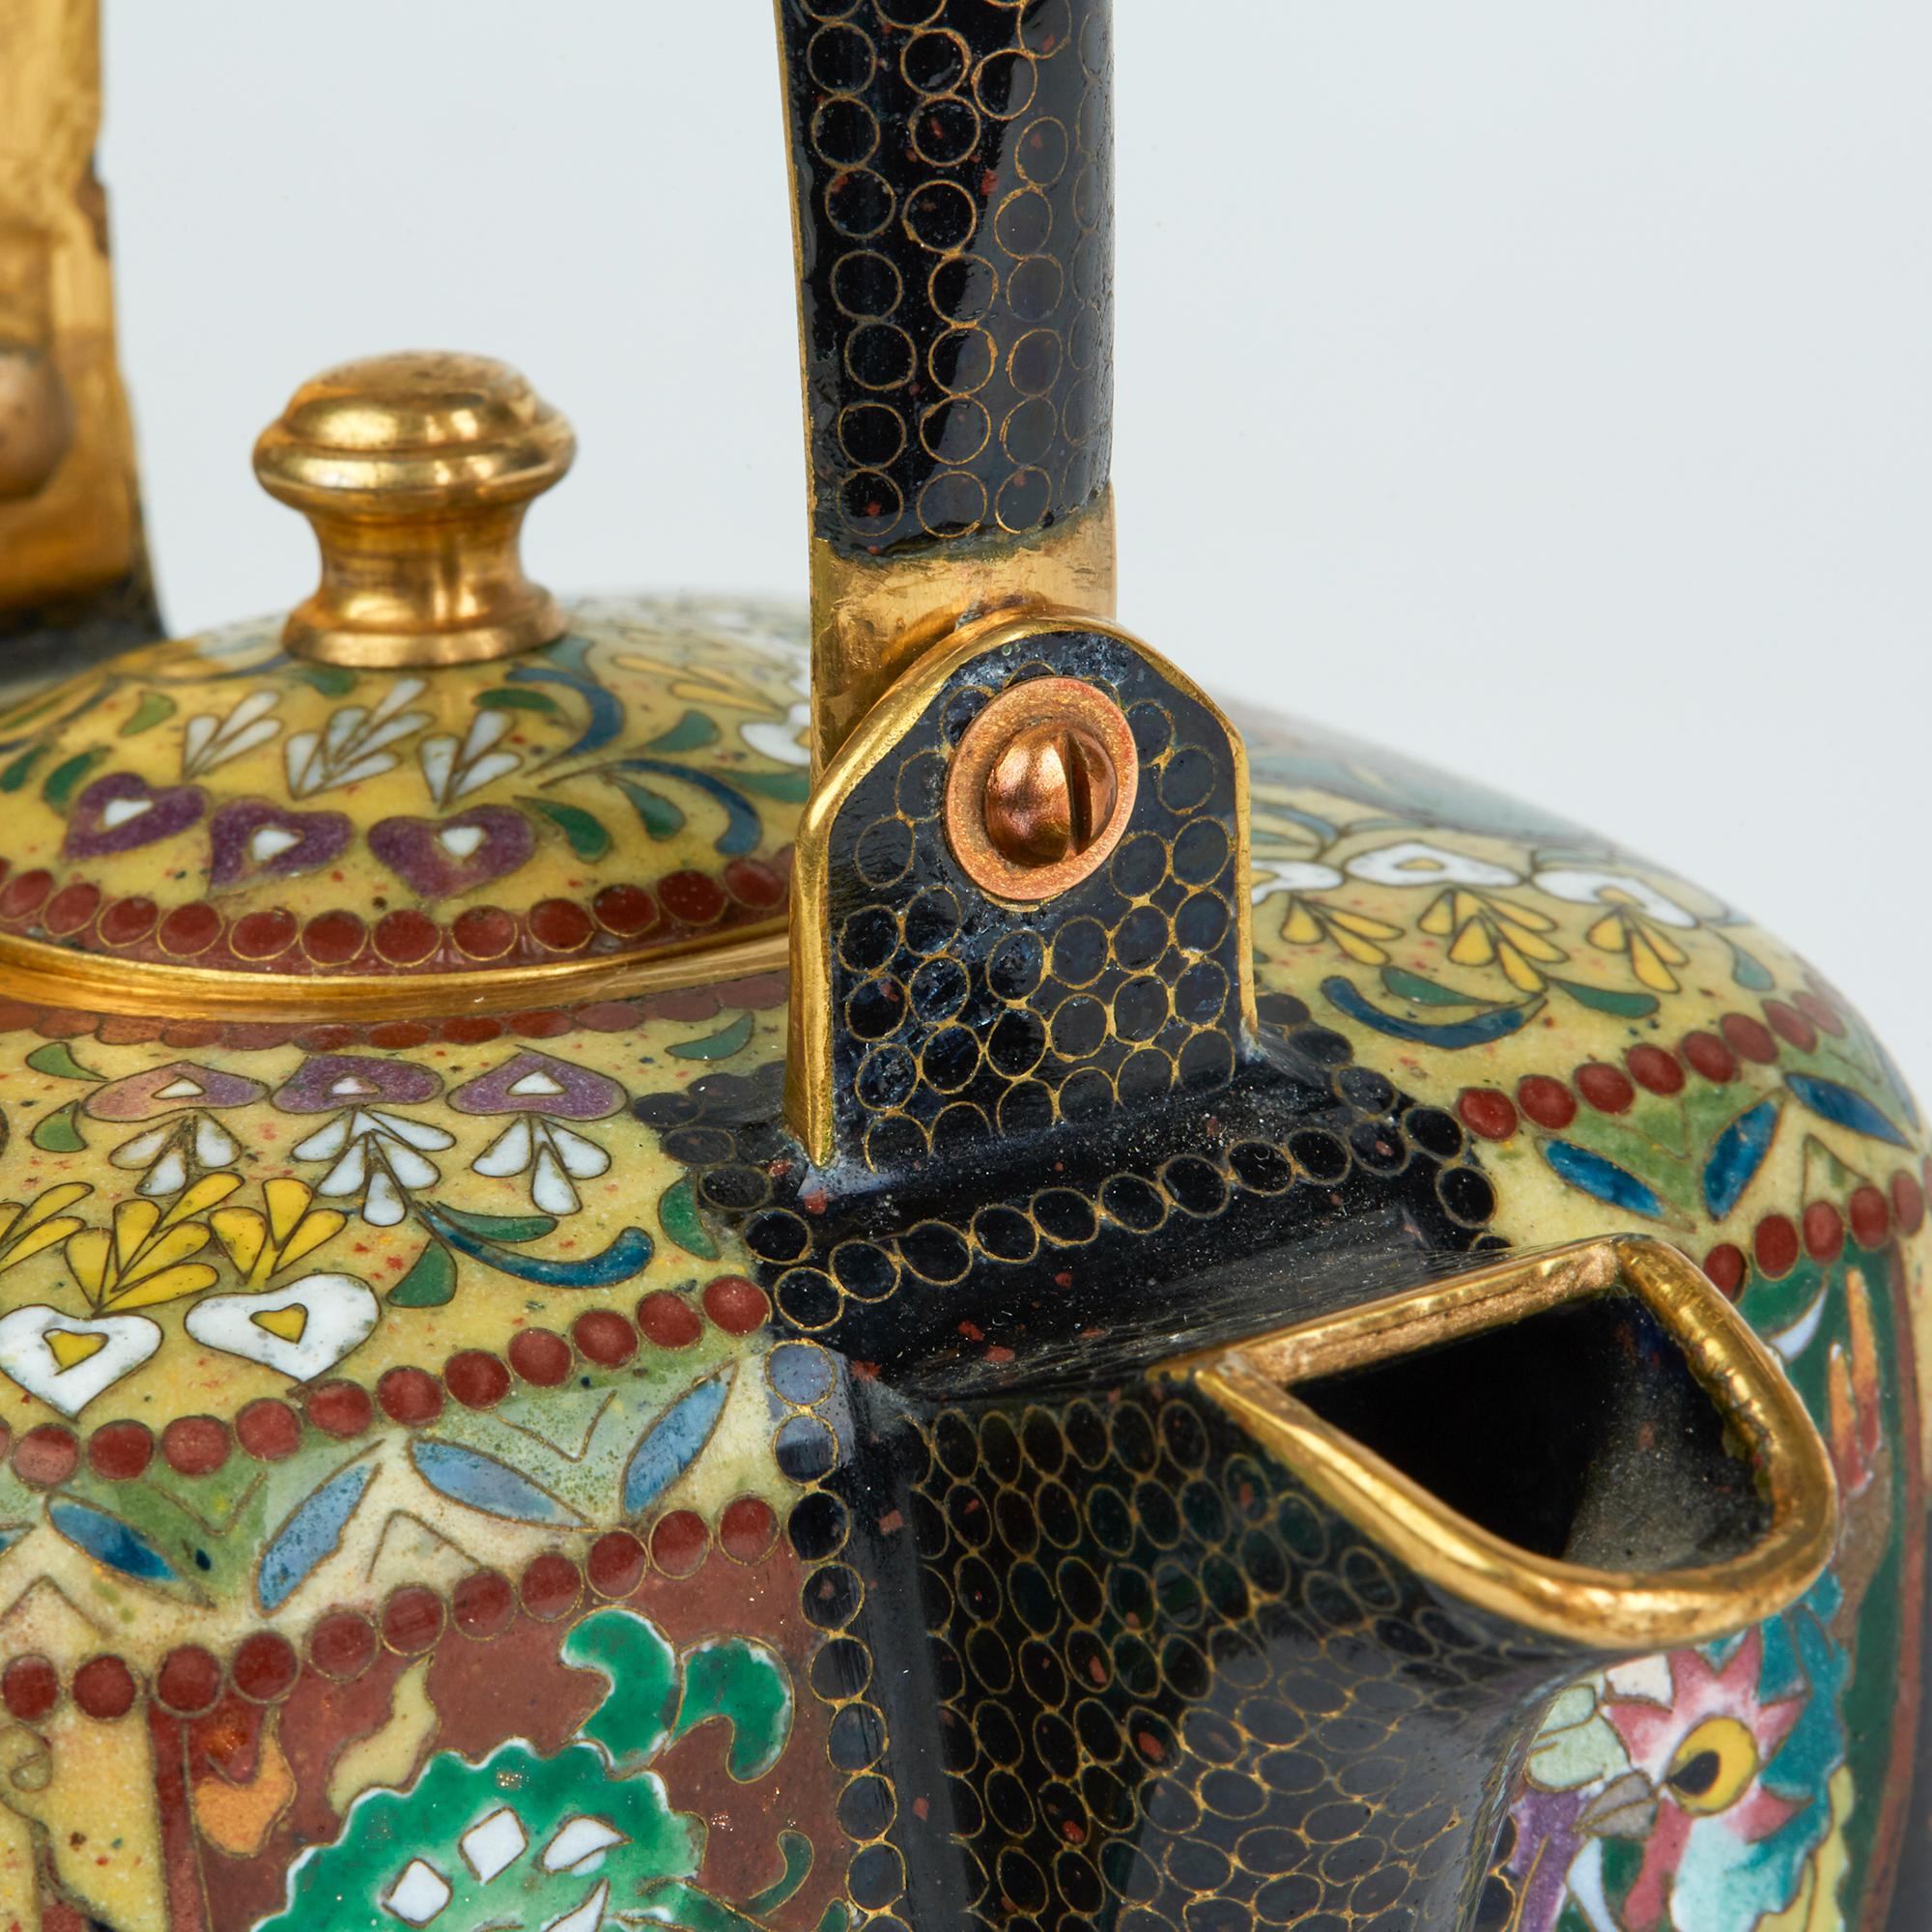 An exceptional antique Japanese cloisonné lidded kettle shaped teapot with gilded metal finish believed to date from the early to mid-20th century. The teapot of square shape stands raised on four small ball shaped feet and is richly and finely